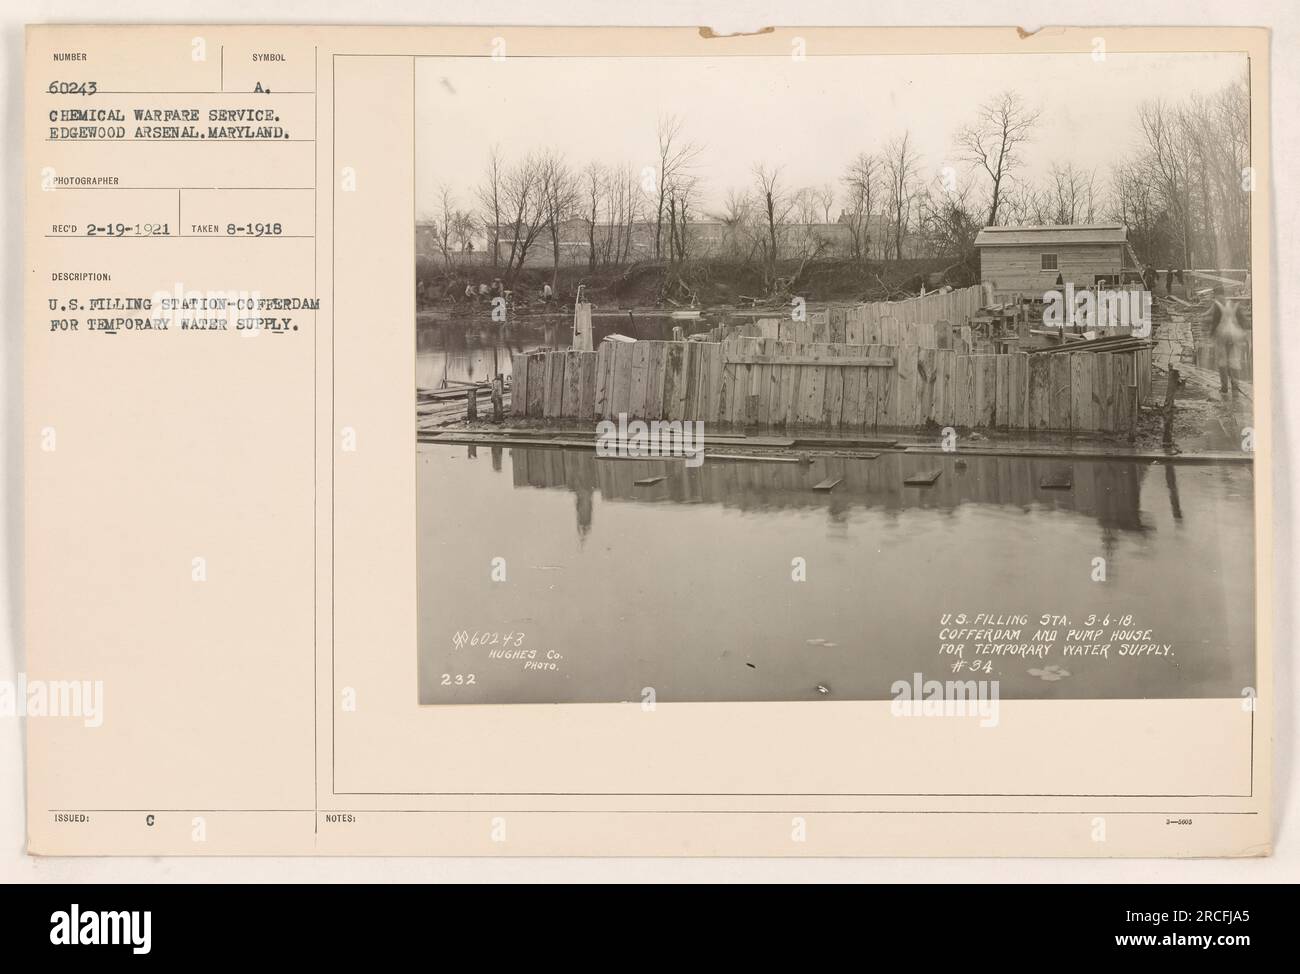 A U.S. filling station at Edgewood Arsenal, MD, operated by the Chemical Warfare Service during World War One. This image shows a cofferdam being constructed for a temporary water supply. The photograph was taken in August 1918 and received by the photographer on February 19, 1921. It was issued with notes 60243 and labeled as photograph number 232 by Hughes Co. Stock Photo